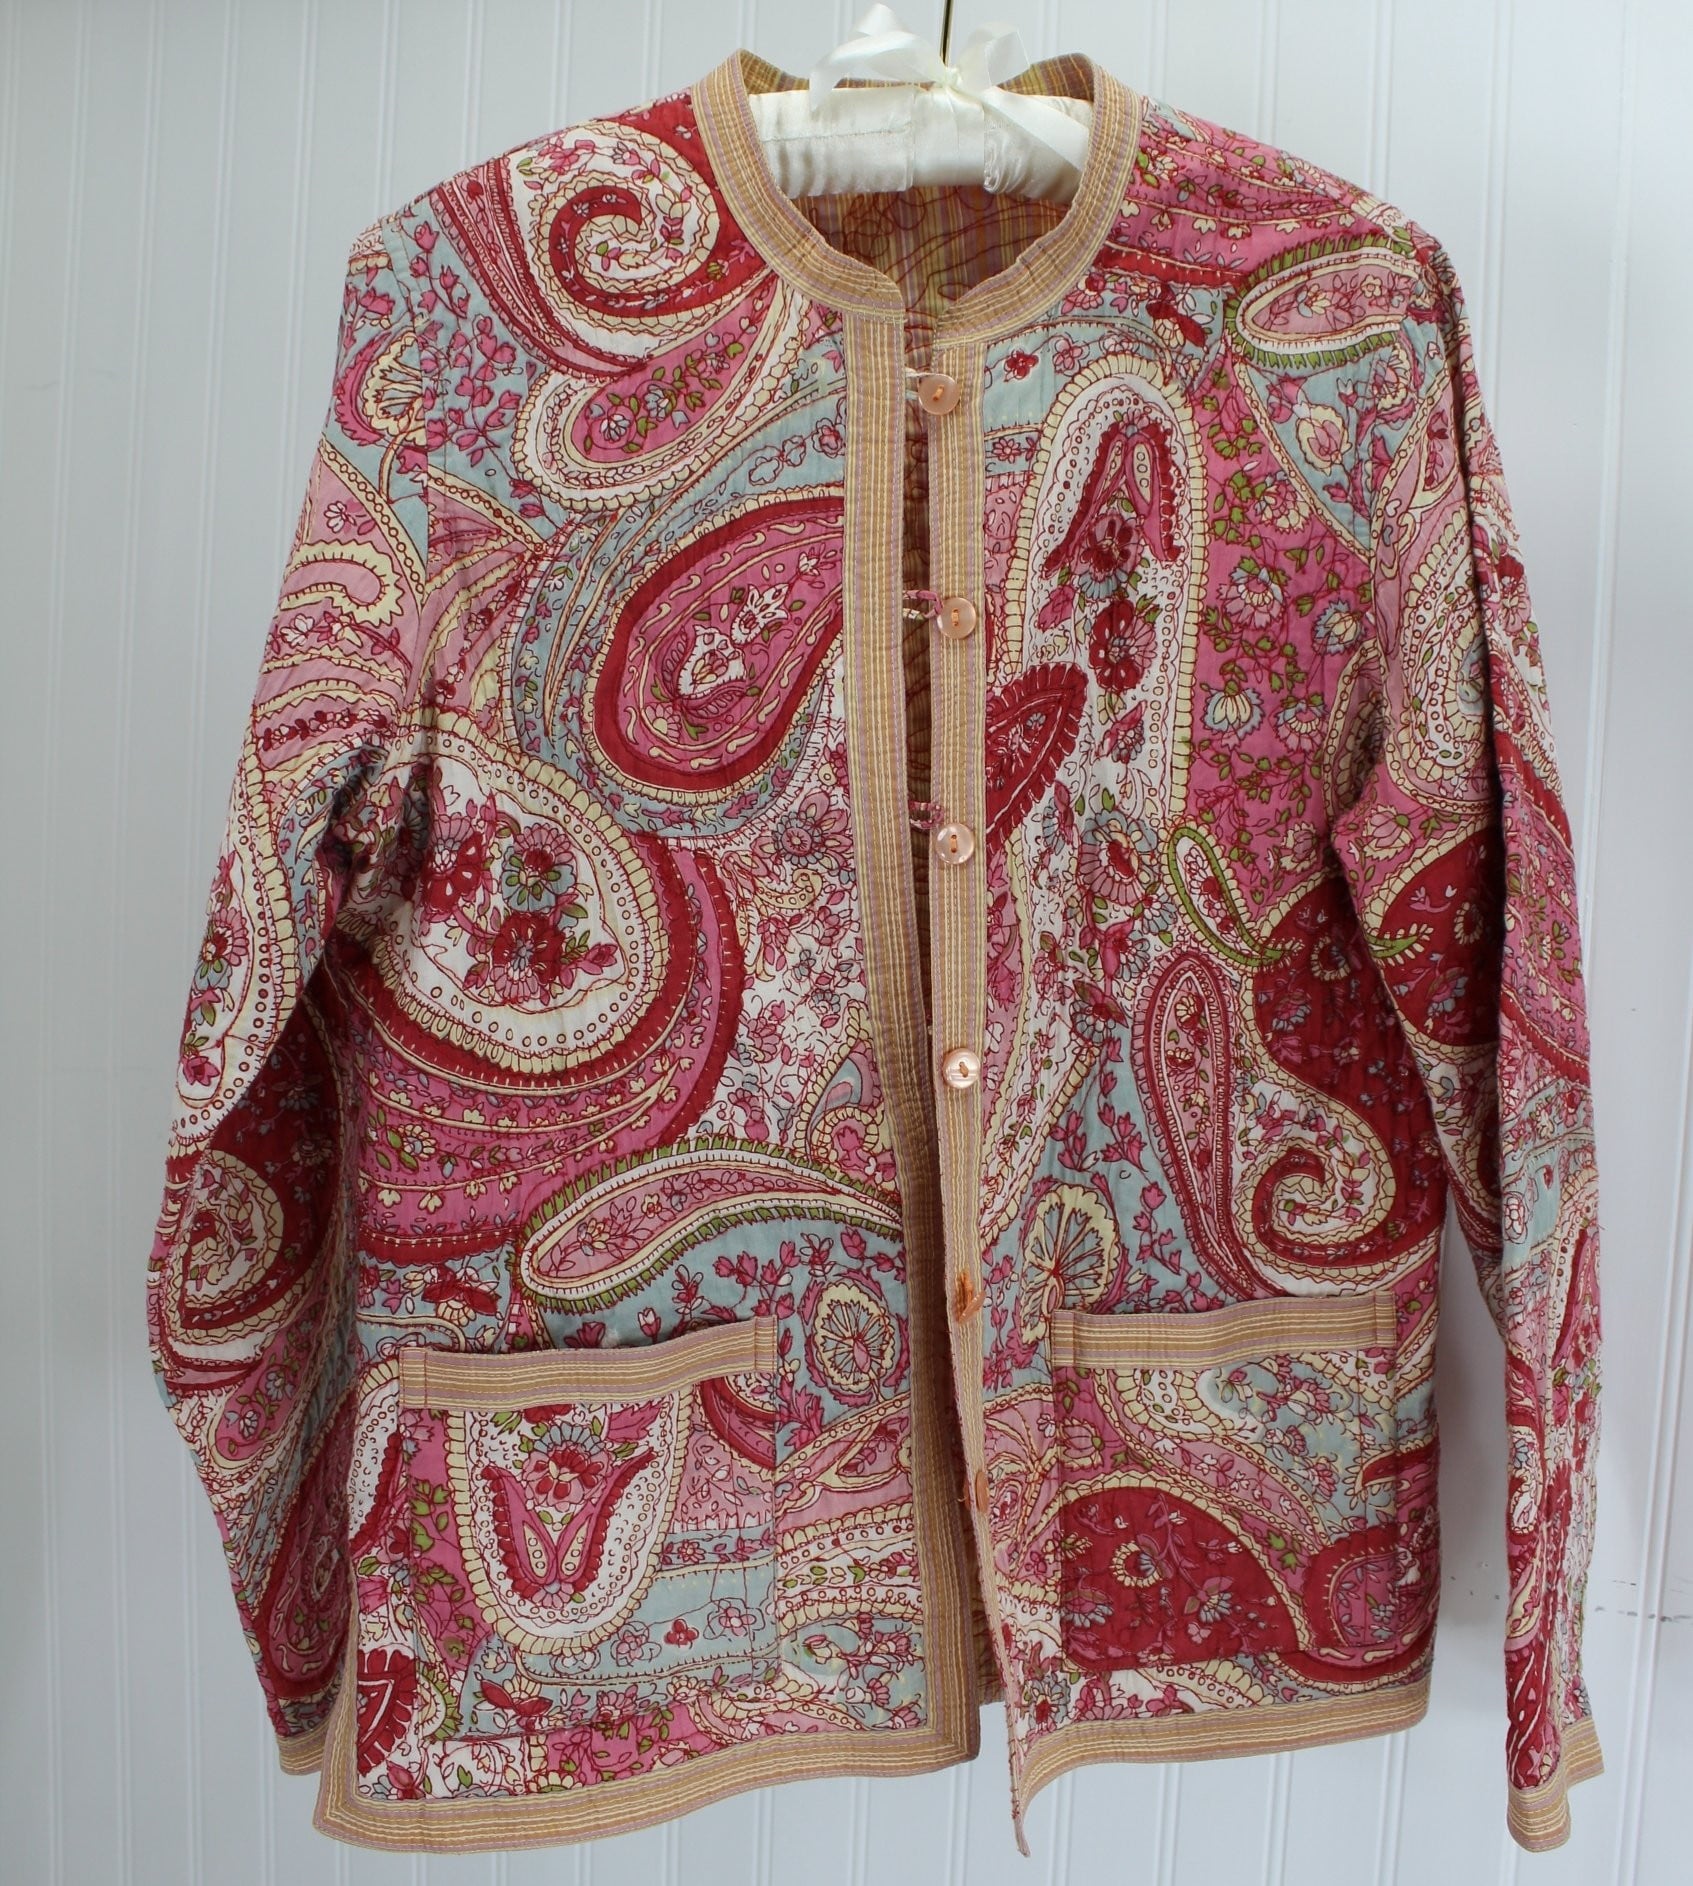 Reversible Quilted Jacket Vera Style Paisley Rose Pink Cream lightweight